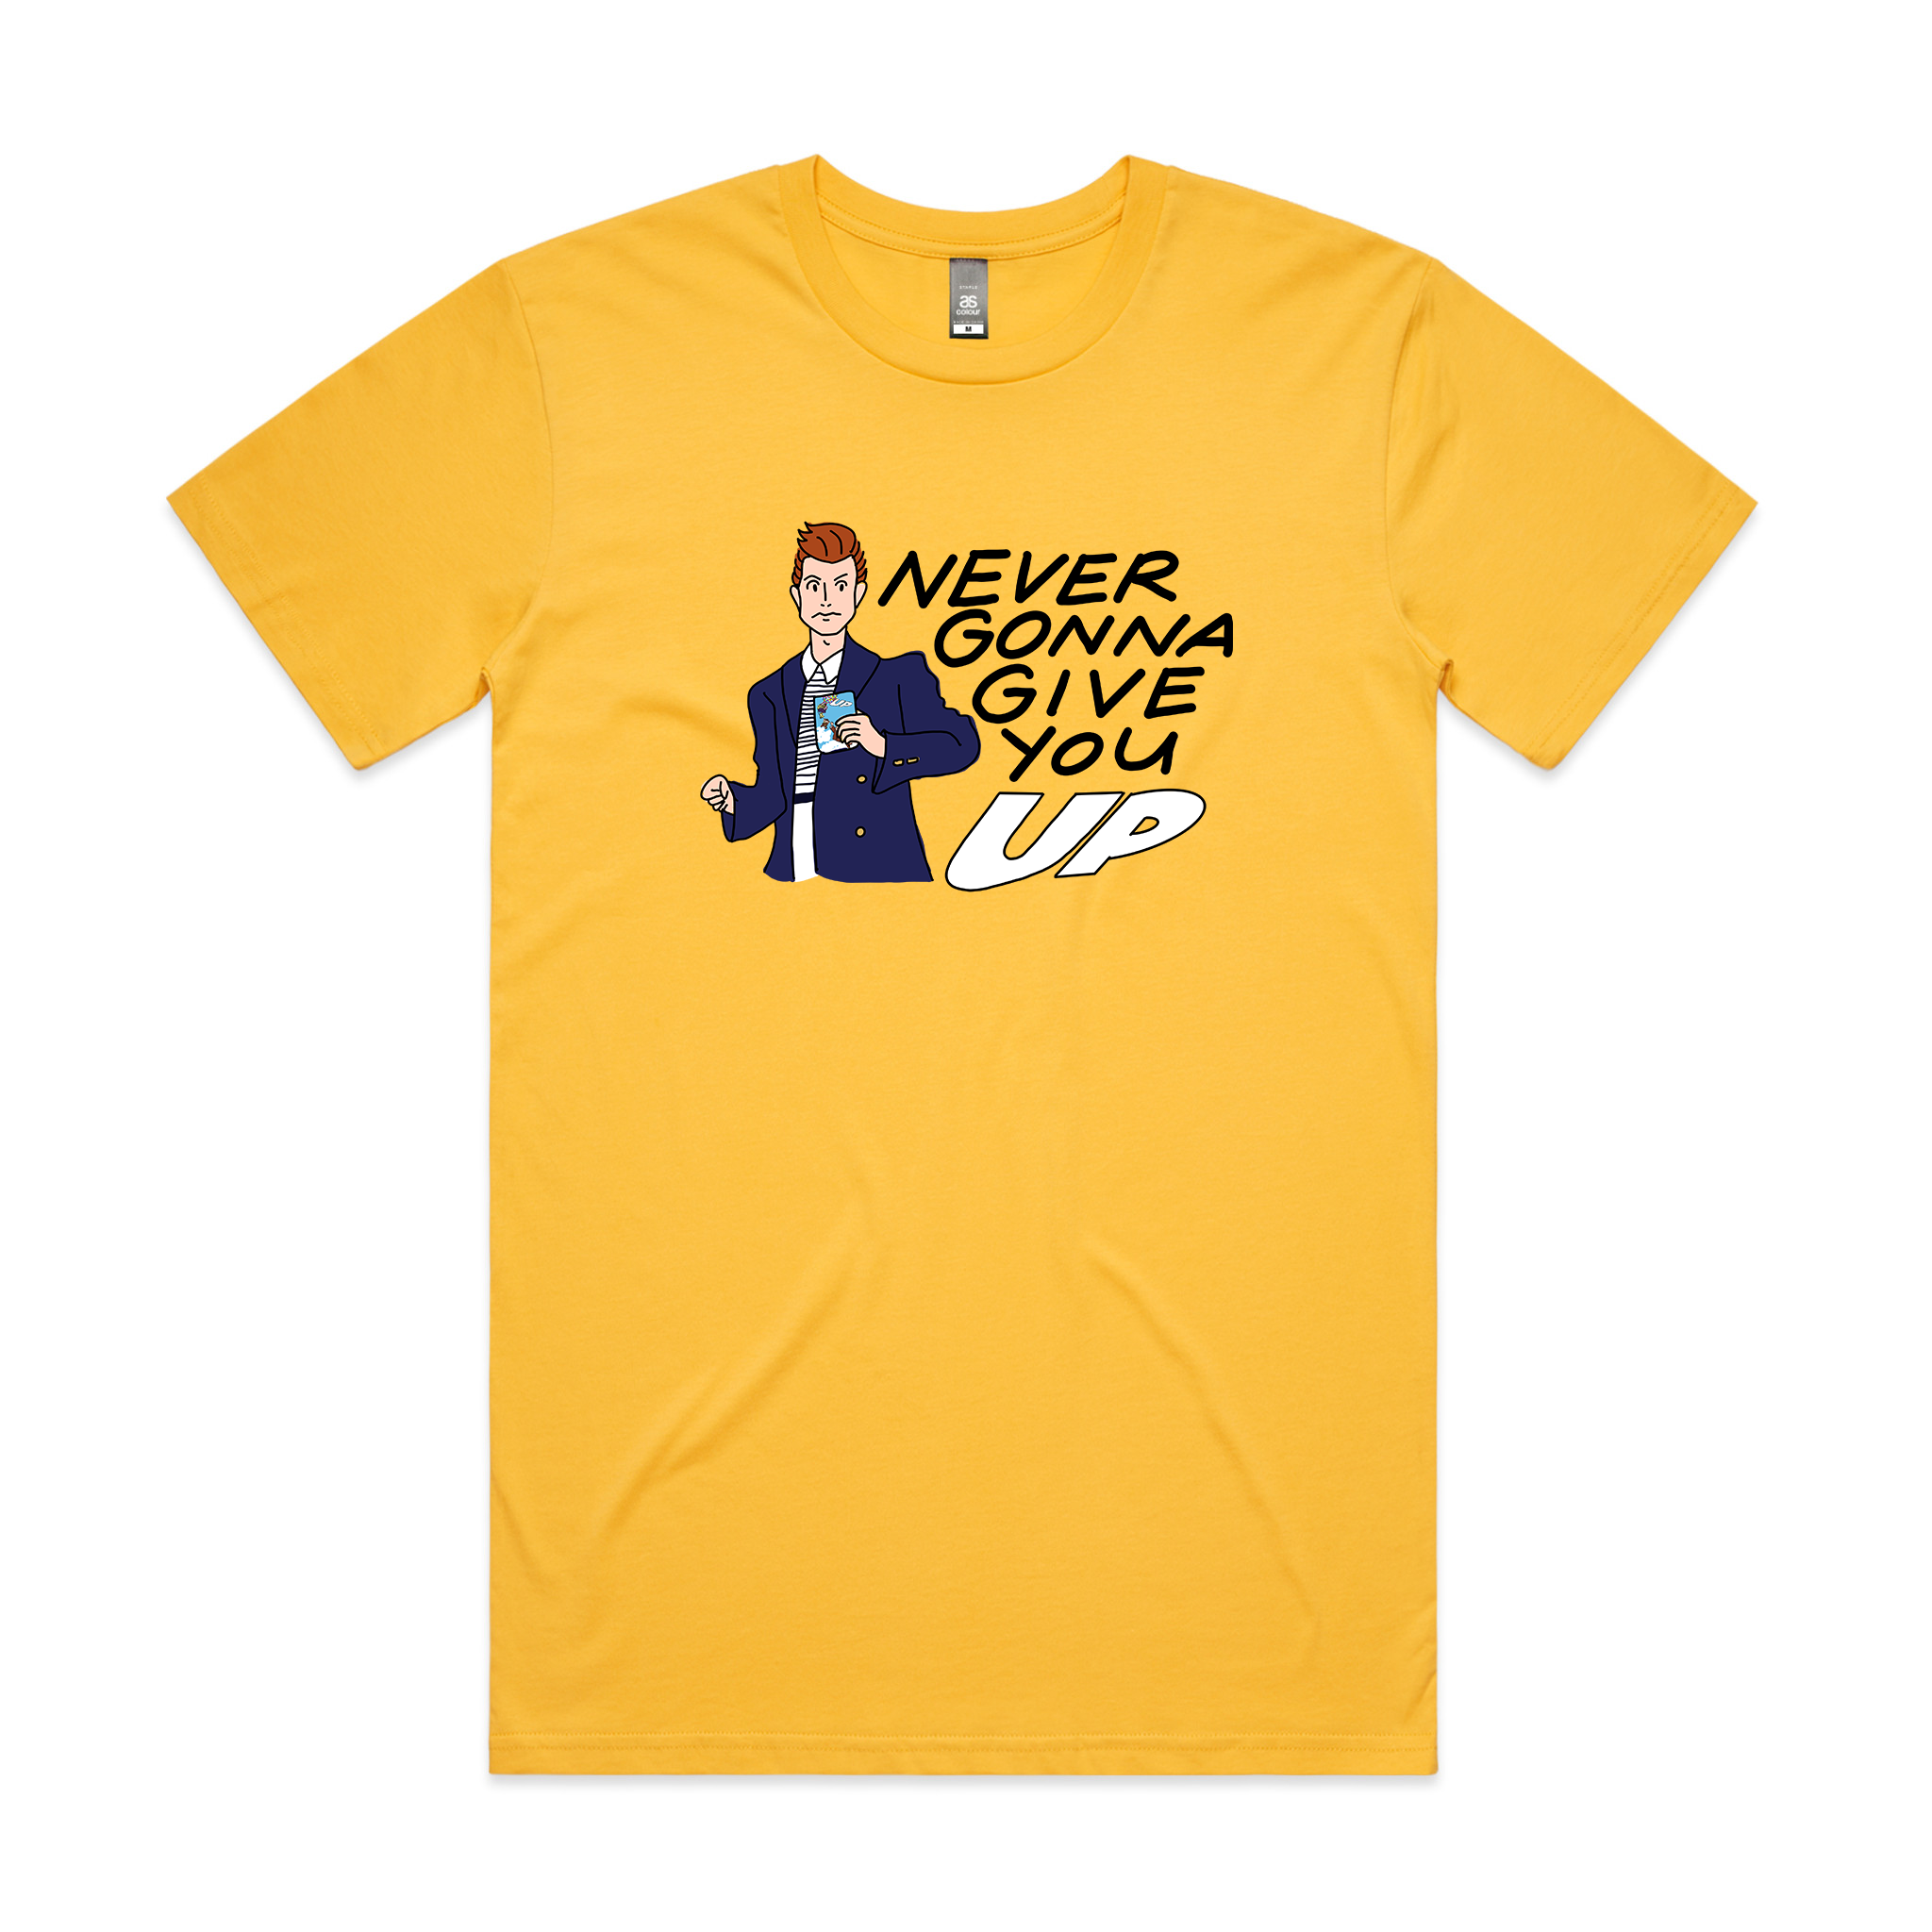 Never Gonna Give You UP Tee